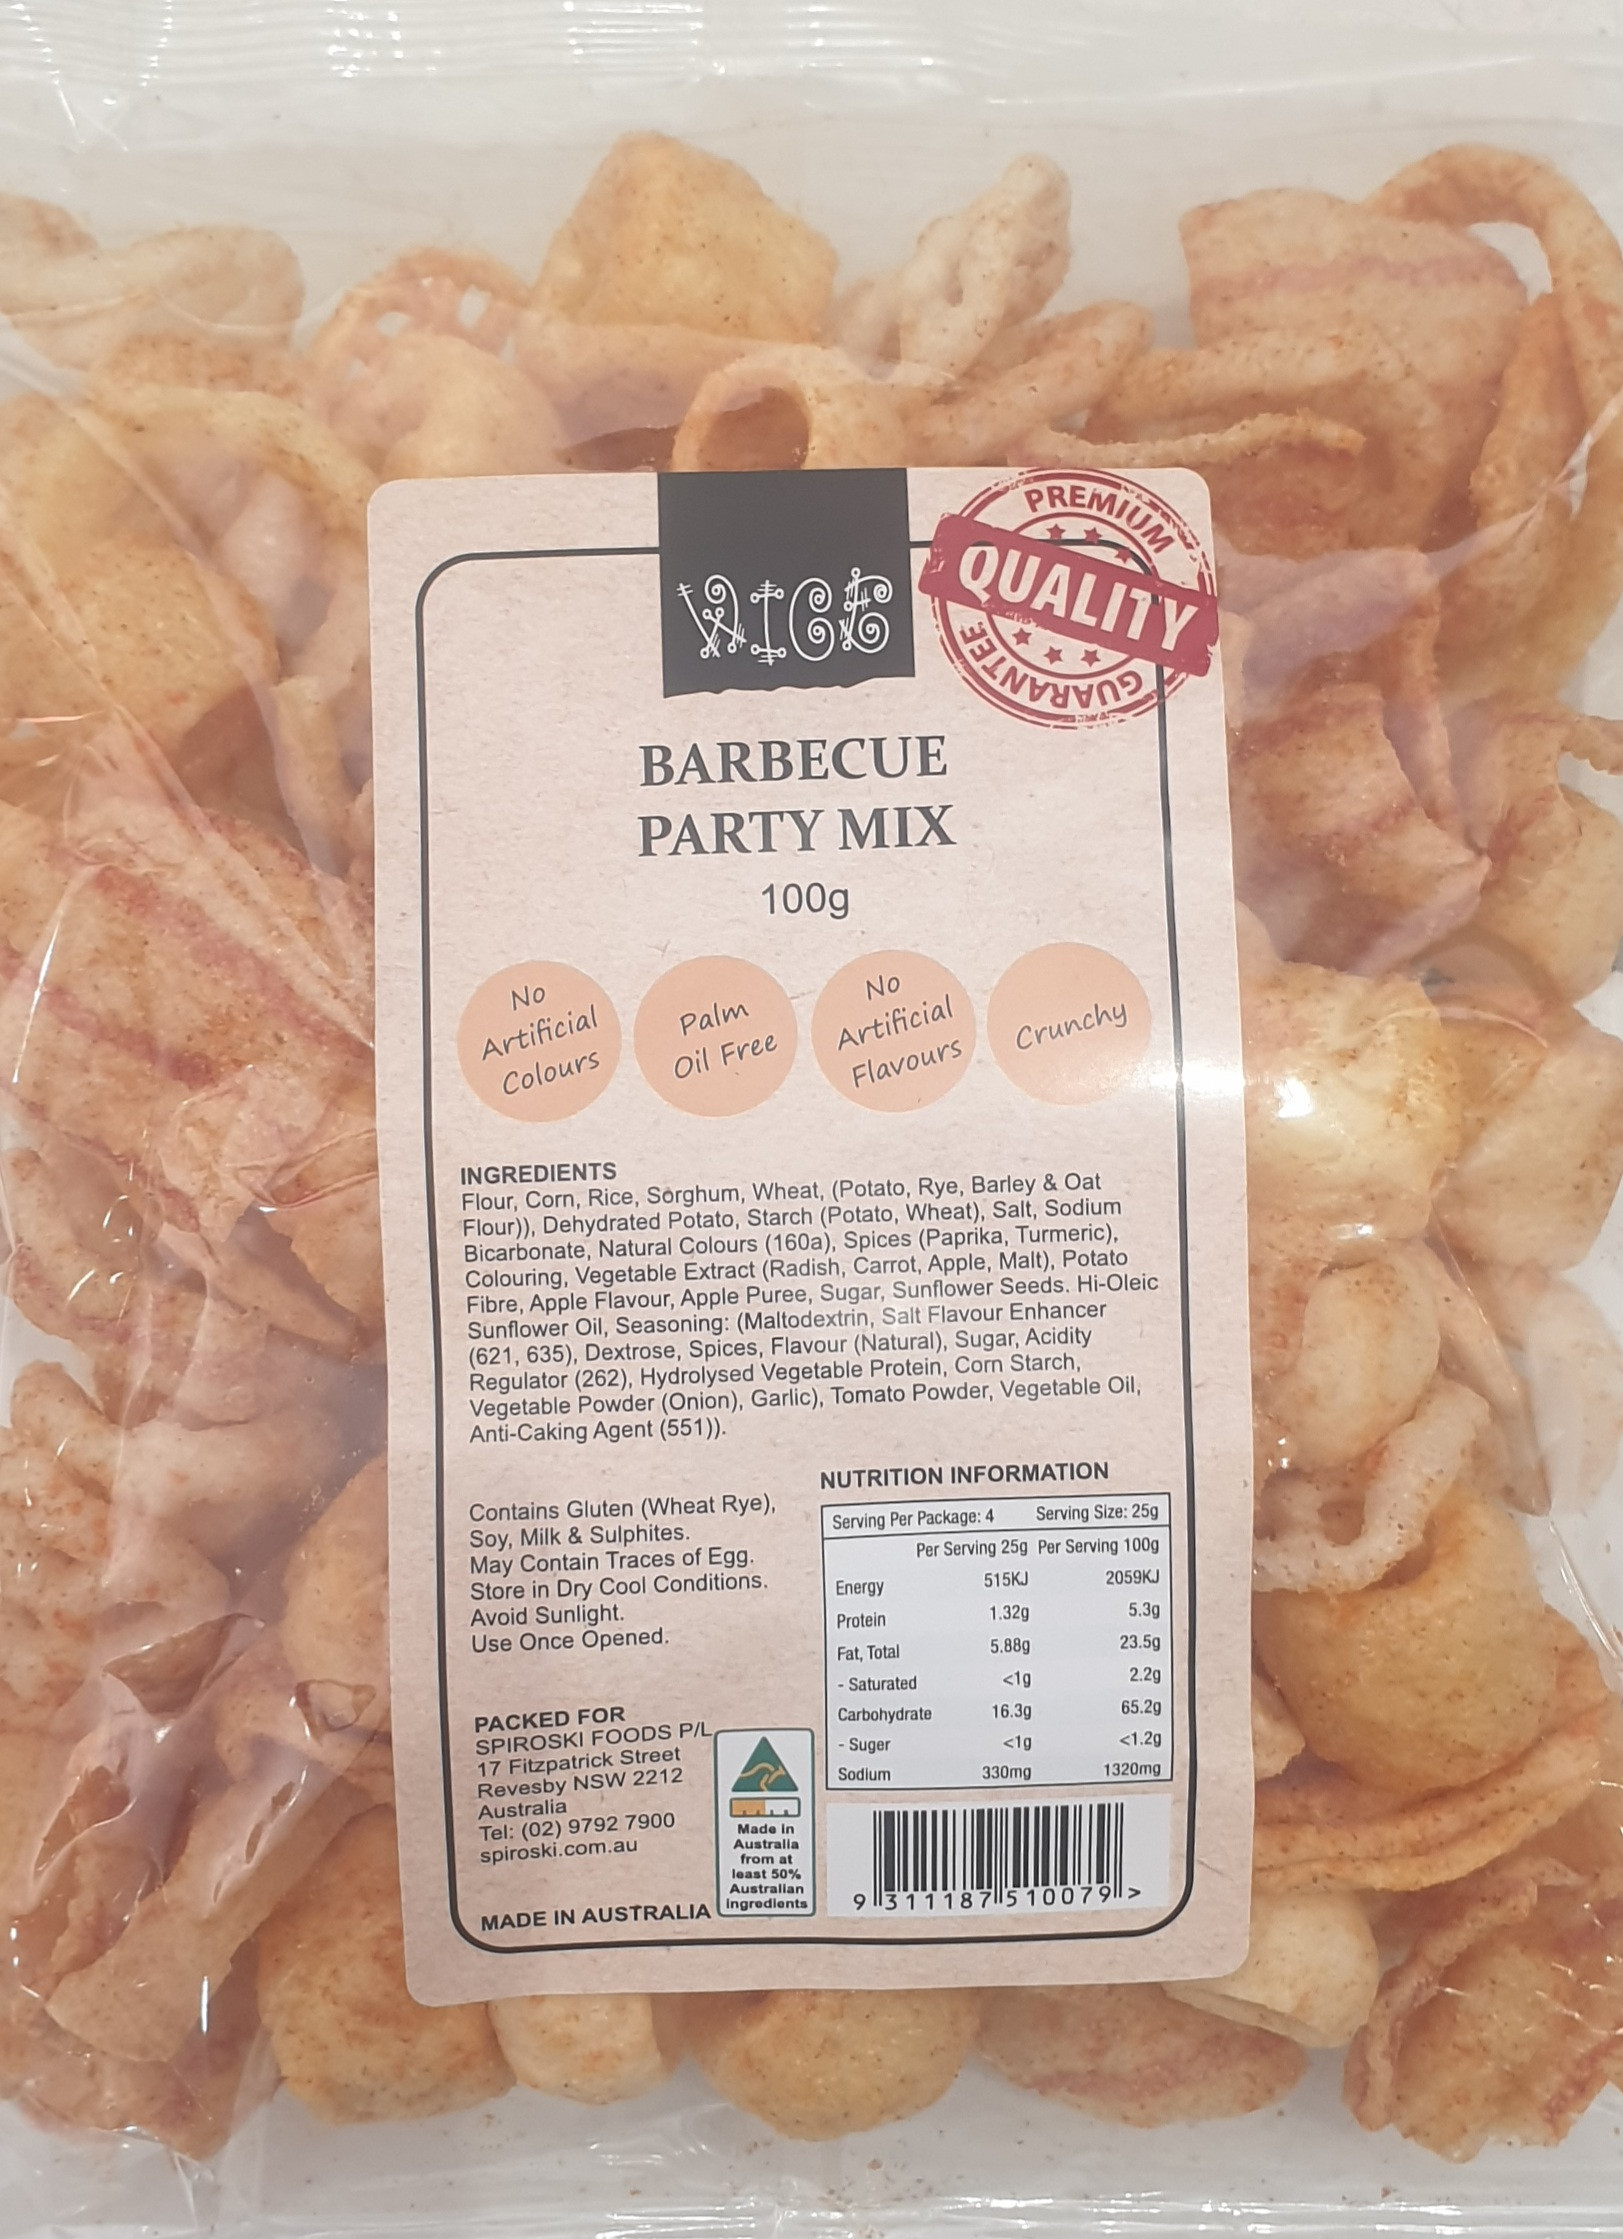 WICE BARBECUE PARTY MIX 100G